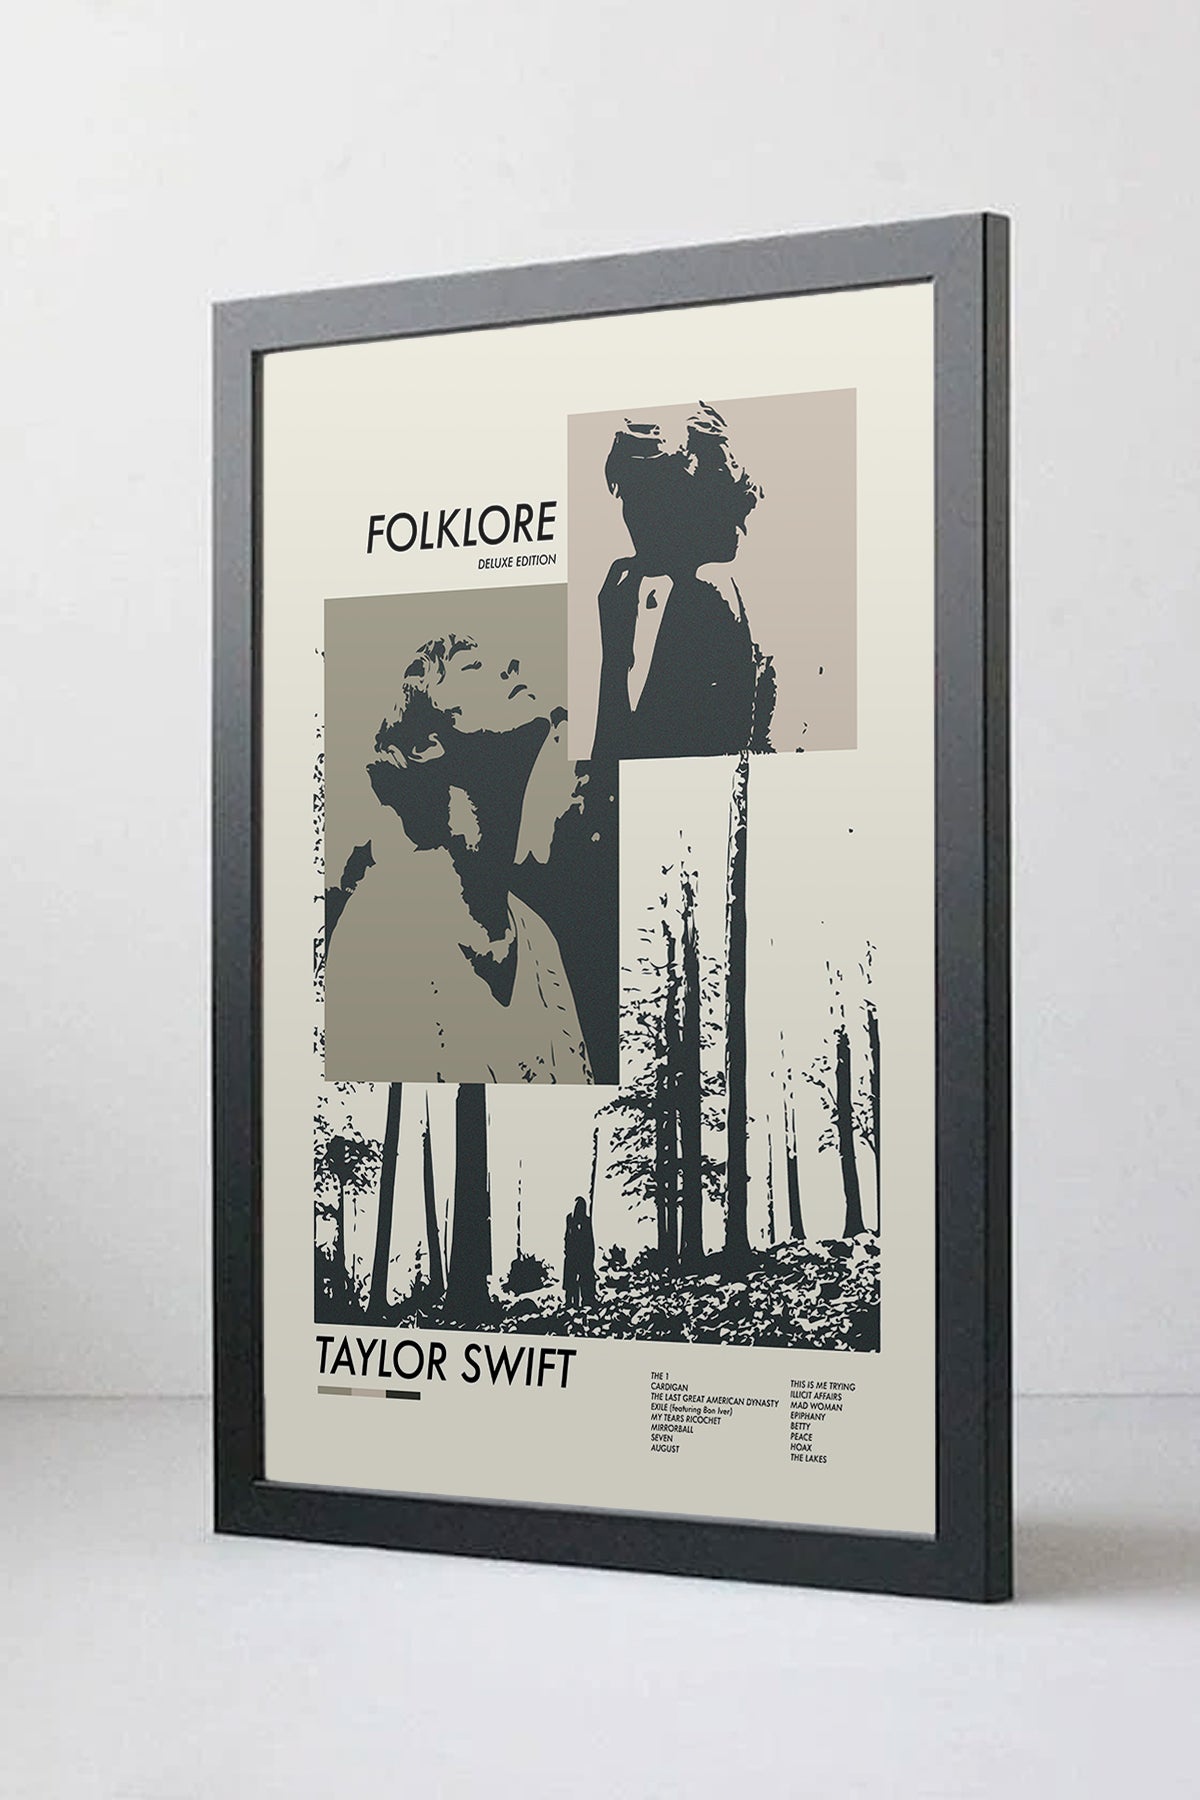 Taylor swift poster  Taylor swift posters, Cute poster, Retro poster